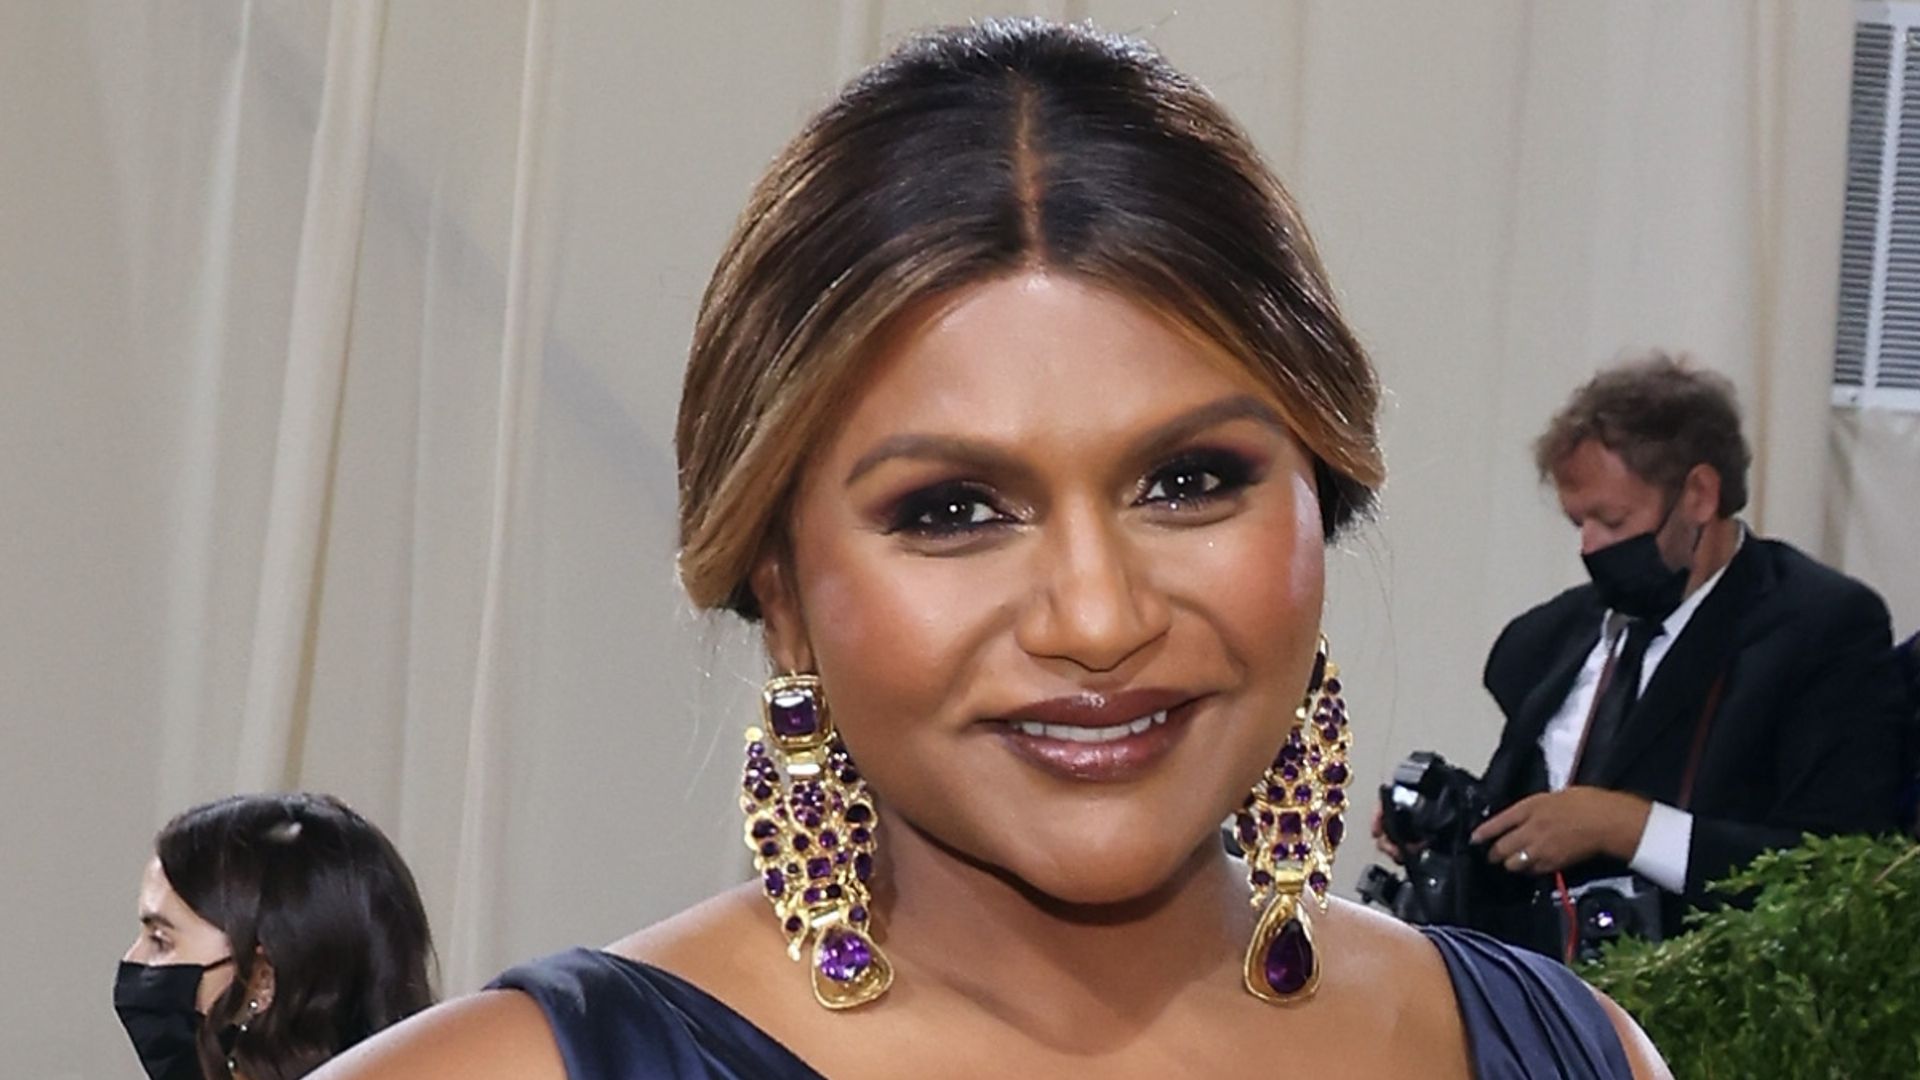 Mindy Kaling shares important health update that inspires fans